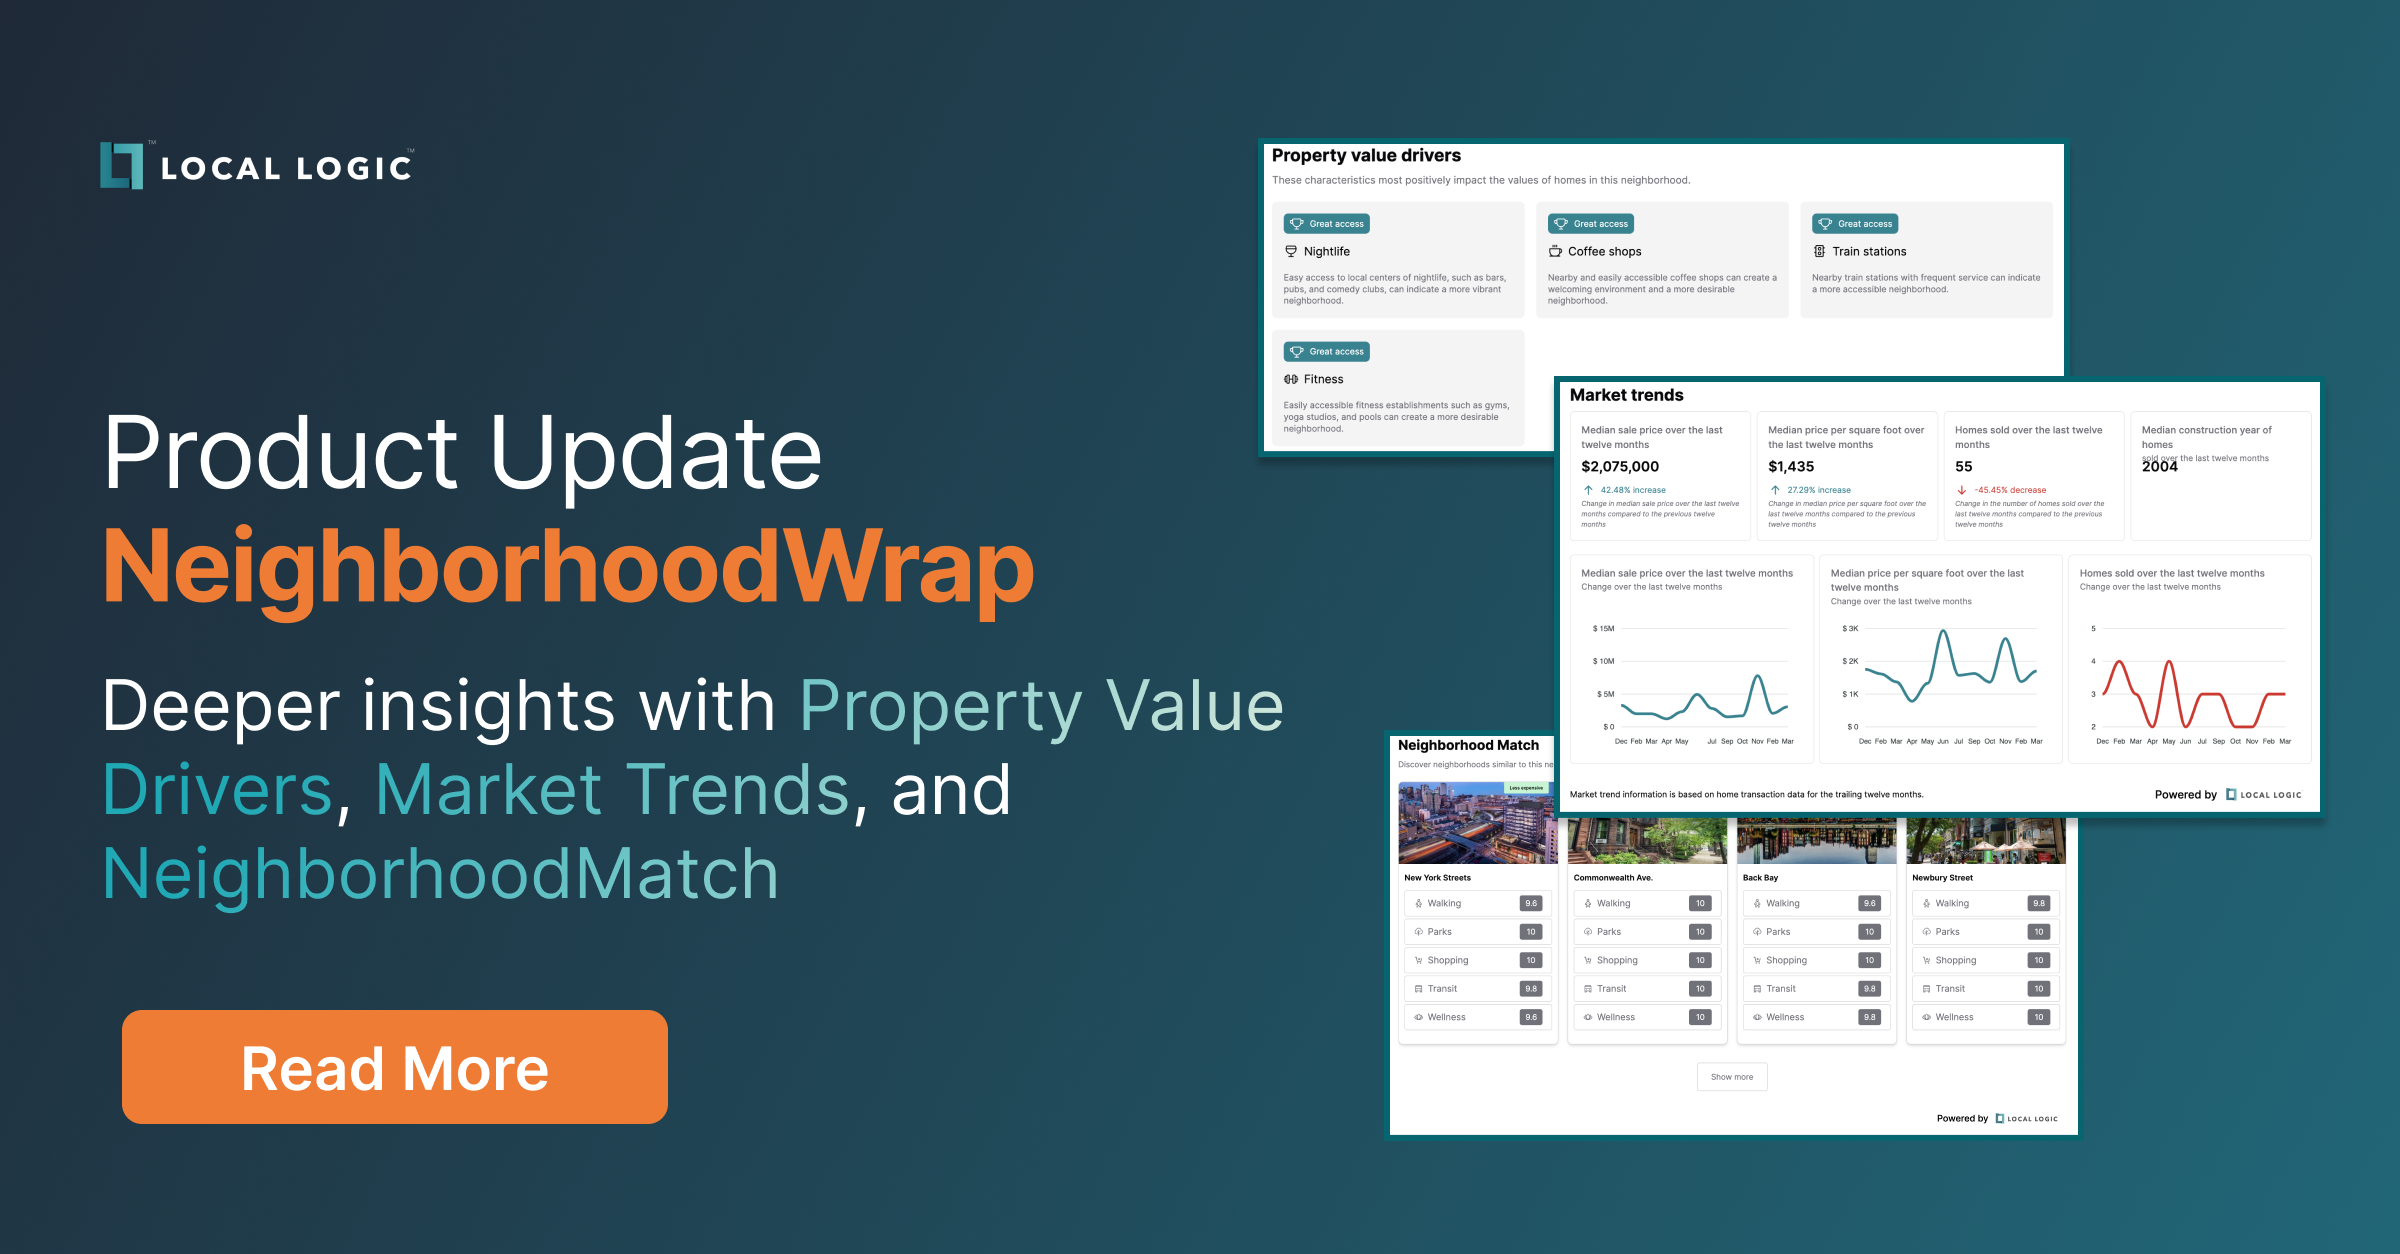 Local Logic logo on top of text "Product Update NeighborhoodWrap: Deeper Insights with Property Value Drivers, Market Trends, and Similar Neighborhoods" Next to it are three screenshots of the three new features added to Local Logic's NeighborhoodWrap product